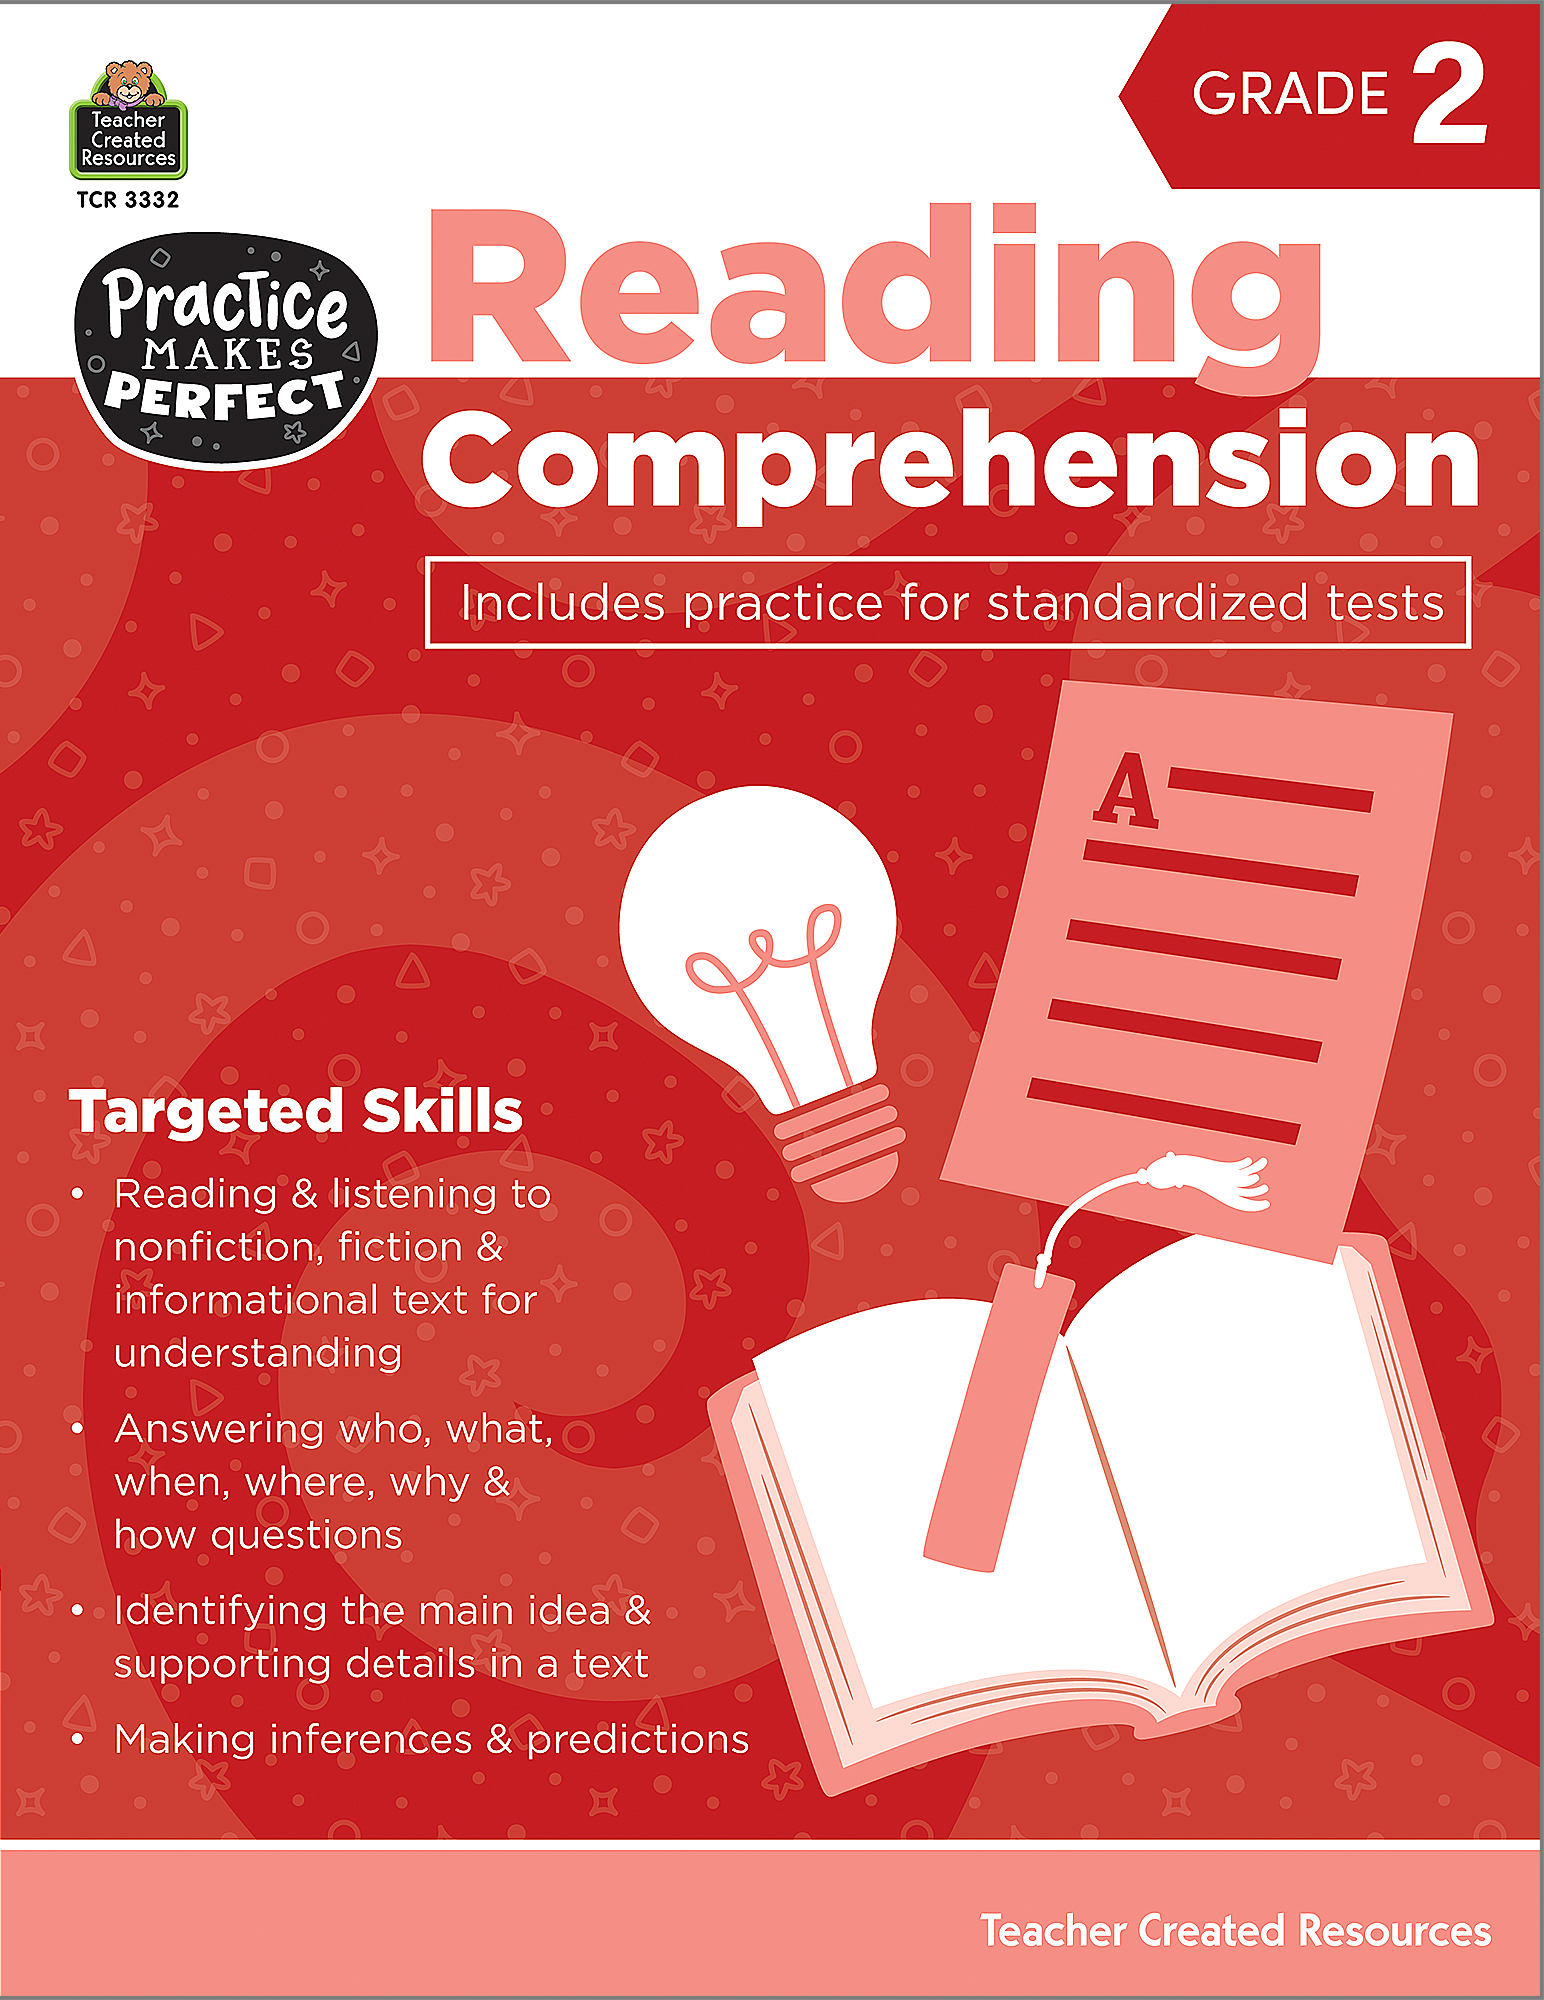 Reading Comprehension Grade 2 - TCR3332 | Teacher Created Resources